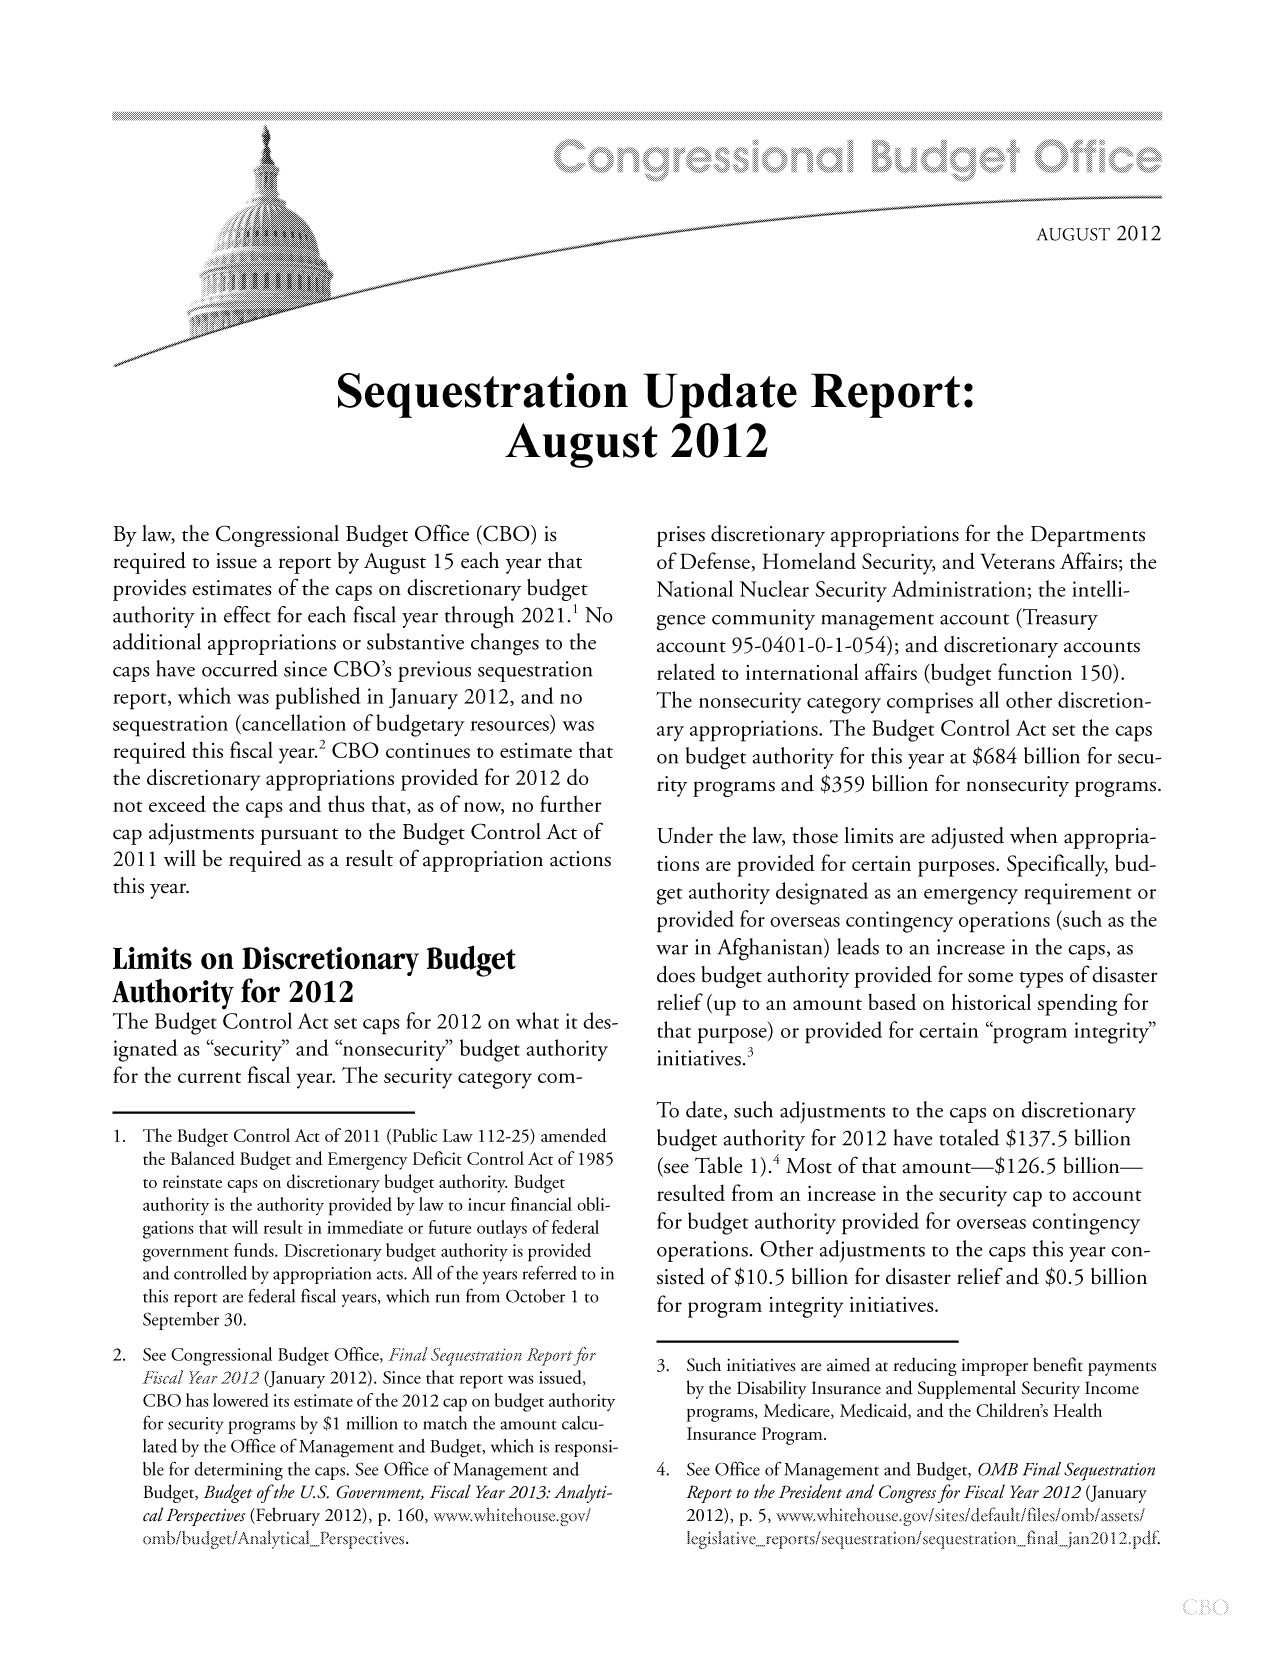 handle is hein.congrec/cbo10825 and id is 1 raw text is: AUGUST 2012
Sequestration Update Report:
August 2012

By law, the Congressional Budget Office (CBO) is
required to issue a report by August 15 each year that
provides estimates of the caps on discretionary budget
authority in effect for each fiscal year through 2021.1 No
additional appropriations or substantive changes to the
caps have occurred since CBO's previous sequestration
report, which was published in January 2012, and no
sequestration (cancellation of budgetary resources) was
required this fiscal year.2 CBO continues to estimate that
the discretionary appropriations provided for 2012 do
not exceed the caps and thus that, as of now, no further
cap adjustments pursuant to the Budget Control Act of
2011 will be required as a result of appropriation actions
this year.
Limits on Discretionary Budget
Authority for 2012
The Budget Control Act set caps for 2012 on what it des-
ignated as security and nonsecurity budget authority
for the current fiscal year. The security category com-
1. The Budget Control Act of 2011 (Public Law 112-25) amended
the Balanced Budget and Emergency Deficit Control Act of 1985
to reinstate caps on discretionary budget authority. Budget
authority is the authority provided by law to incur financial obli-
gations that will result in immediate or future outlays of federal
government funds. Discretionary budget authority is provided
and controlled by appropriation acts. All of the years referred to in
this report are federal fiscal years, which run from October 1 to
September 30.
2. See Congressional Budget Office, Fina S qttestntion Reportf  r
Fiscal Yea; 2012 (January 2012). Since that report was issued,
CBO has lowered its estimate of the 2012 cap on budget authority
for security programs by $1 million to match the amount calcu-
lated by the Office of Management and Budget, which is responsi-
ble for determining the caps. See Office of Management and
Budget, Budget of the U.S. Government, Fiscal Year 2013: Analyti-
cal Perspectives (February 2012), p. 160, wwwxwlhitehouse'gov/
omb/budget/AnilyticalPei-spectives.

prises discretionary appropriations for the Departments
of Defense, Homeland Security, and Veterans Affairs; the
National Nuclear Security Administration; the intelli-
gence community management account (Treasury
account 95-0401-0-1-054); and discretionary accounts
related to international affairs (budget function 150).
The nonsecurity category comprises all other discretion-
ary appropriations. The Budget Control Act set the caps
on budget authority for this year at $684 billion for secu-
rity programs and $359 billion for nonsecurity programs.
Under the law, those limits are adjusted when appropria-
tions are provided for certain purposes. Specifically, bud-
get authority designated as an emergency requirement or
provided for overseas contingency operations (such as the
war in Afghanistan) leads to an increase in the caps, as
does budget authority provided for some types of disaster
relief (up to an amount based on historical spending for
that purpose) or provided for certain program integrity
initiatives.3
To date, such adjustments to the caps on discretionary
budget authority for 2012 have totaled $137.5 billion
(see Table 1).4 Most of that amount-$126.5 billion
resulted from an increase in the security cap to account
for budget authority provided for overseas contingency
operations. Other adjustments to the caps this year con-
sisted of $10.5 billion for disaster relief and $0.5 billion
for program integrity initiatives.
3. Such initiatives are aimed at reducing improper benefit payments
by the Disability Insurance and Supplemental Security Income
programs, Medicare, Medicaid, and the Children's Health
Insurance Program.
4. See Office of Management and Budget, OMB Final Sequestration
Report to the President and Congress for Fiscal Year 2012 (January
2012), p. 5, vv,,vwitebiouse.gov/sites/default/files/omb/assets/
.egislative reports/sequestrati on/sequestration fnaI  j i  i2012pdf.


